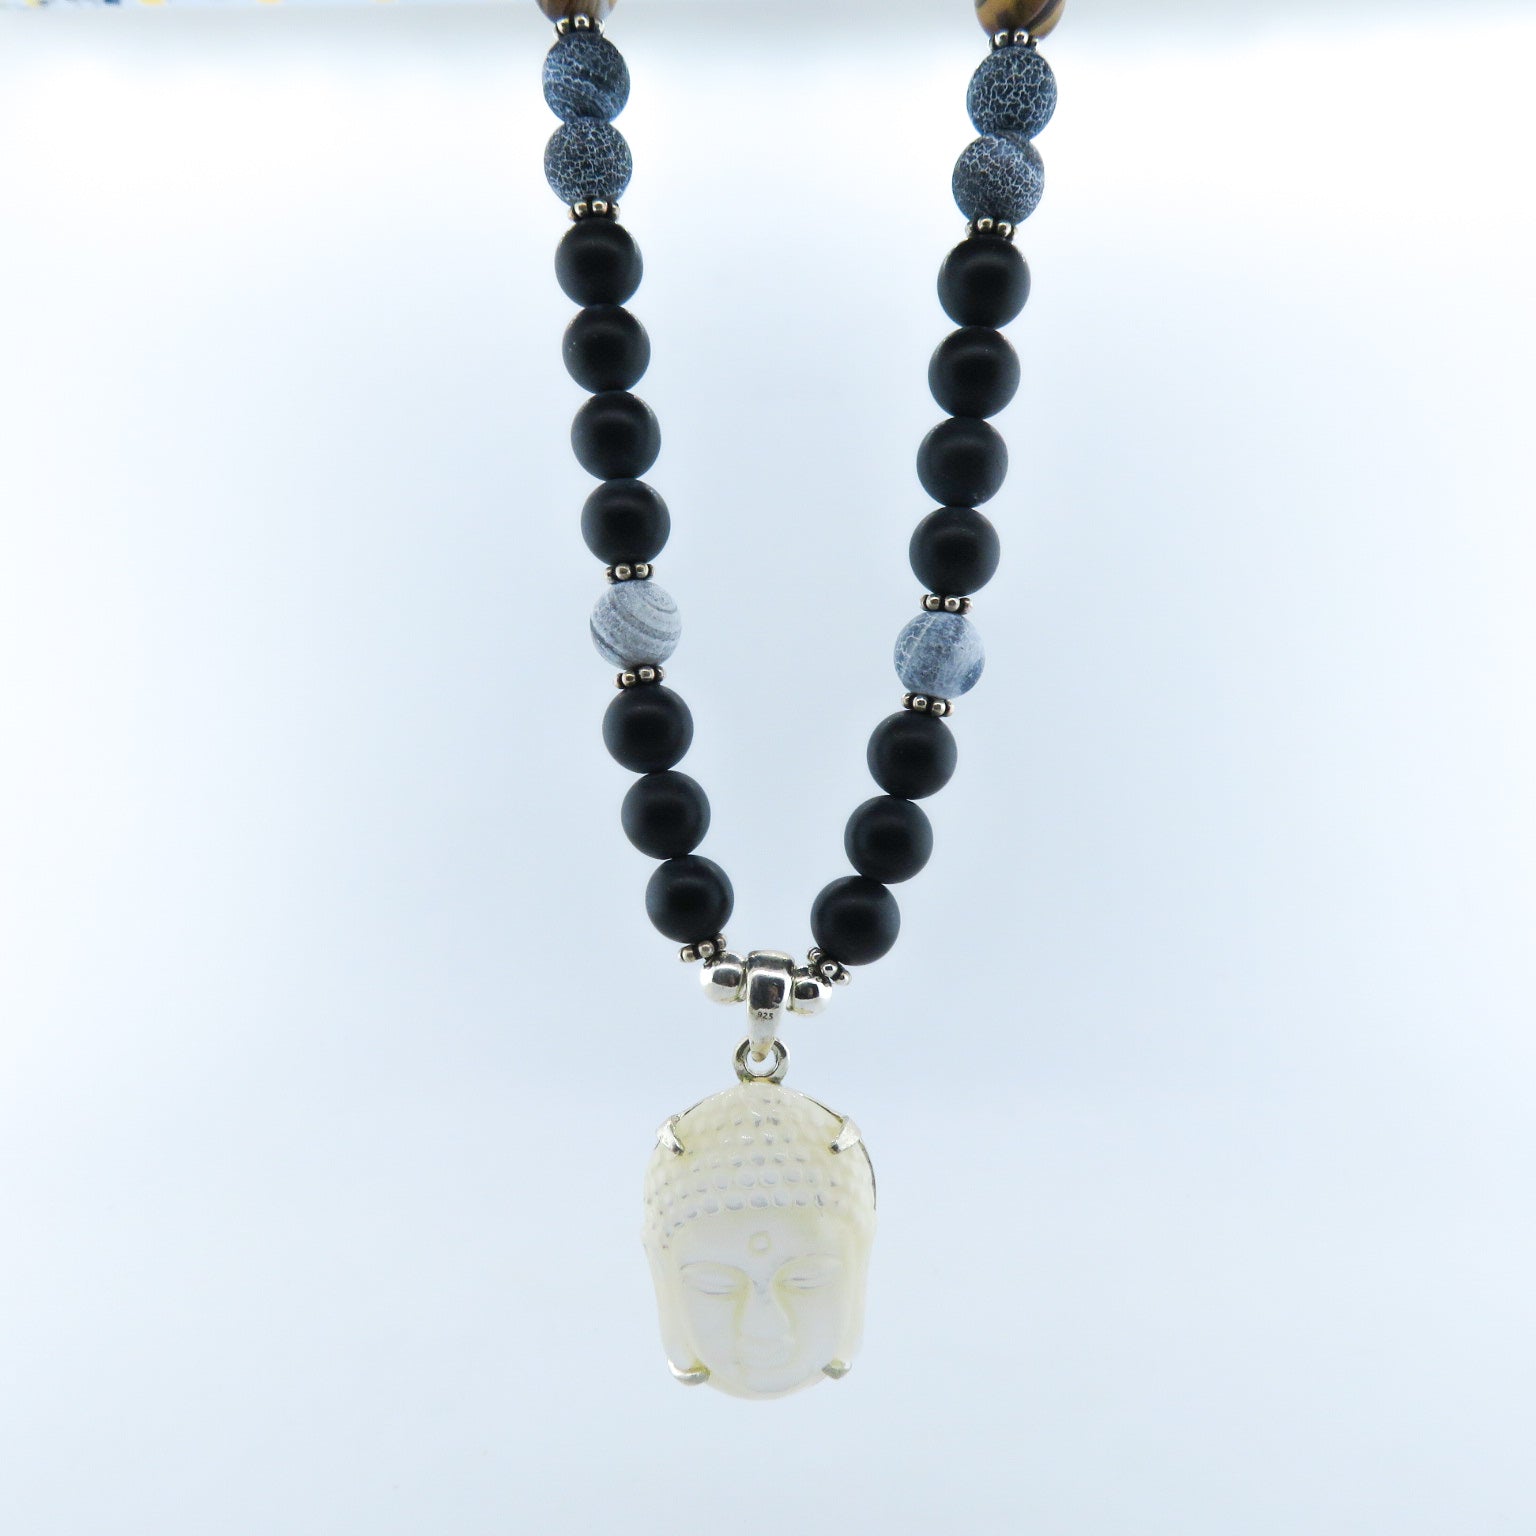 Mother of Pearl Buddha Head Necklace with Black Onyx, Agate, Lava and Silver Beads